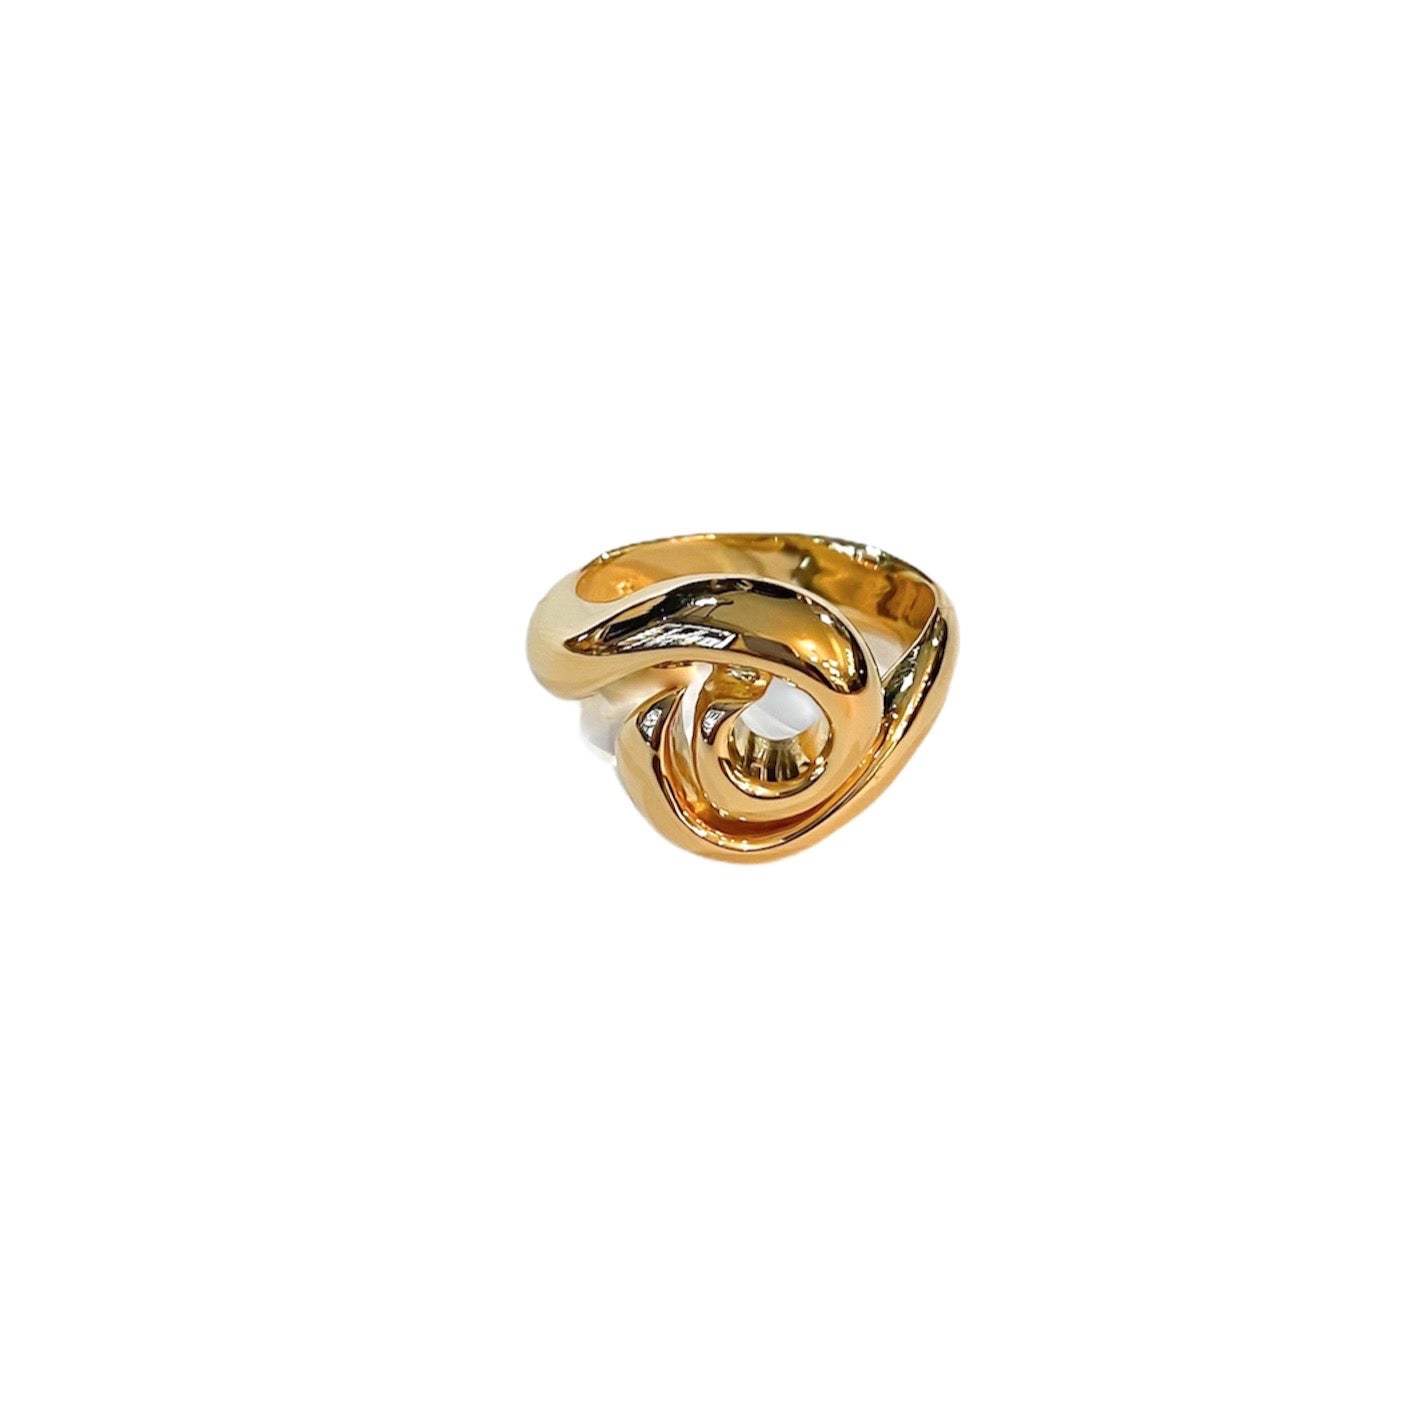 Surrea Blank gold plated silver ring.